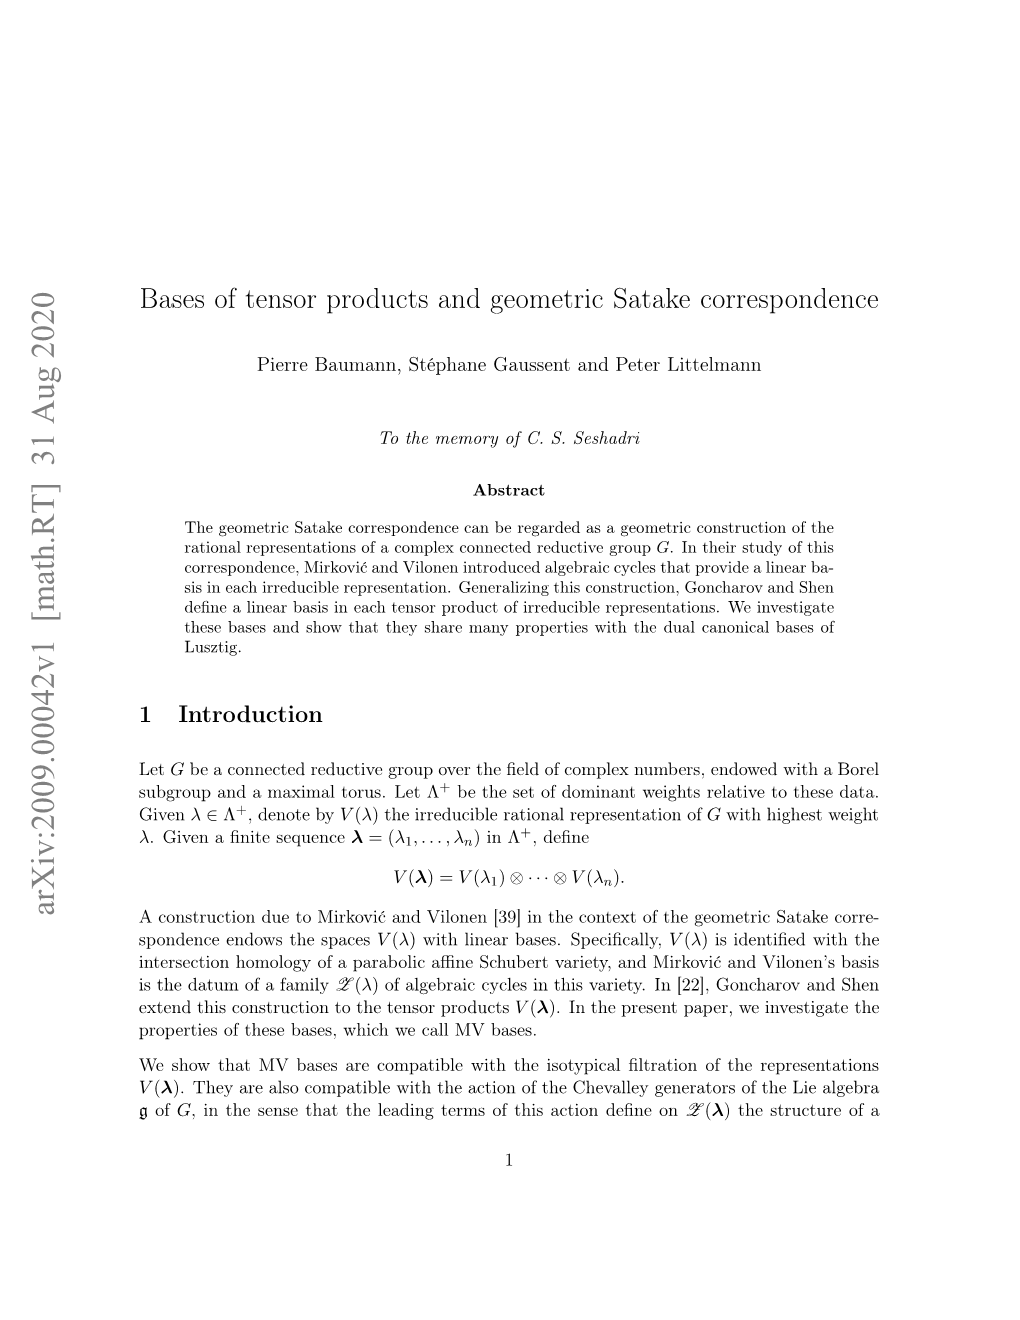 Bases of Tensor Products and Geometric Satake Correspondence